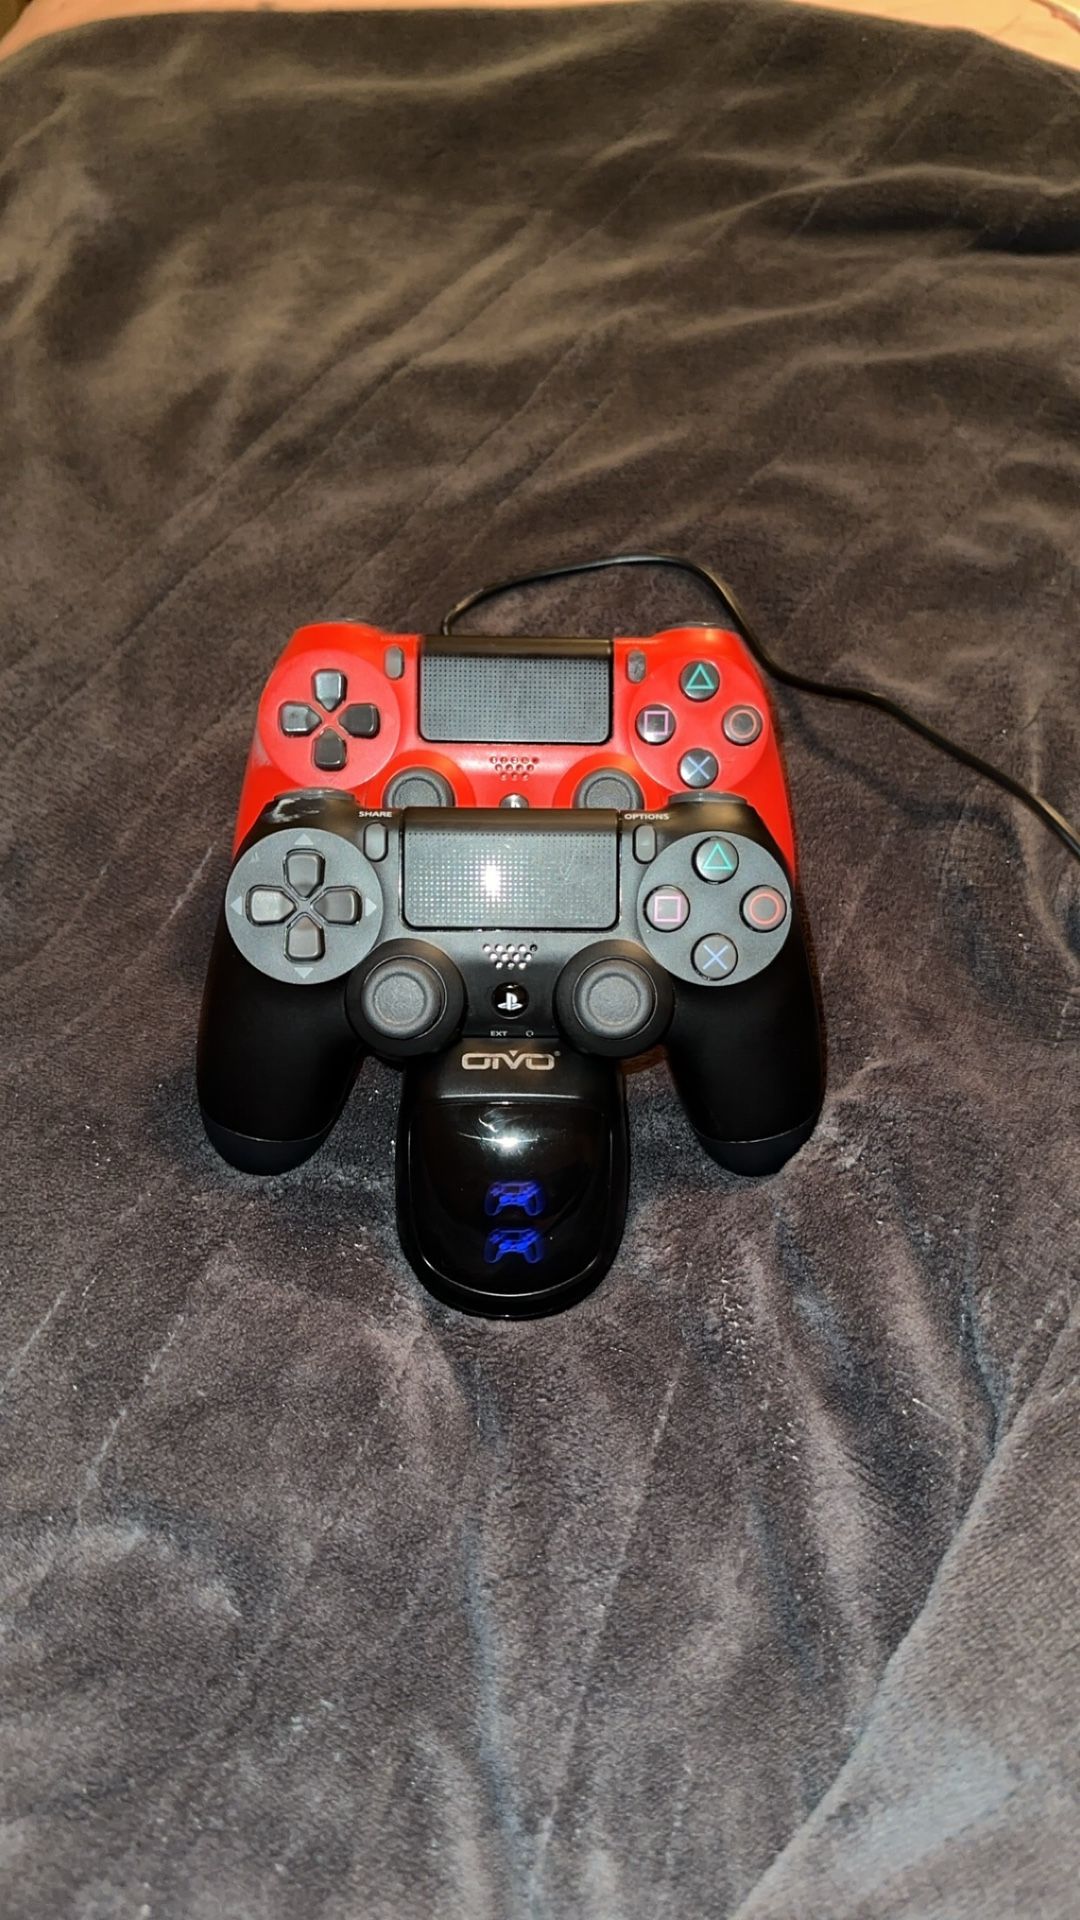 2 ps4 Controllers 